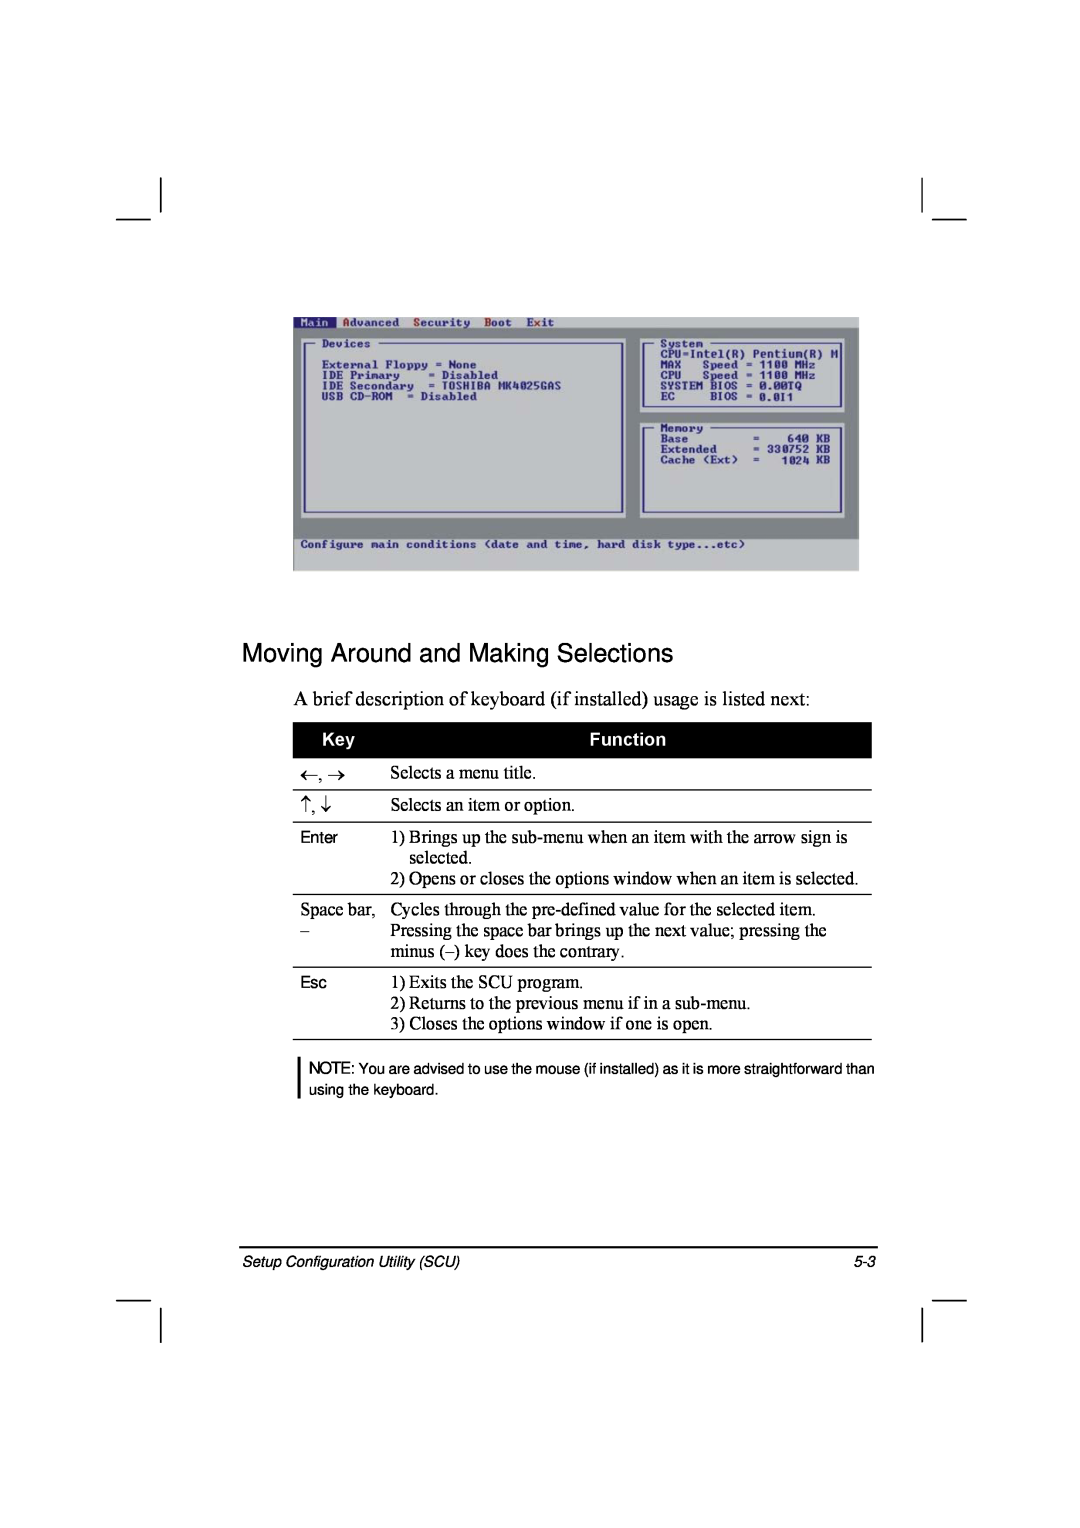 TAG 20 Series manual Moving Around and Making Selections, A brief description of keyboard if installed usage is listed next 